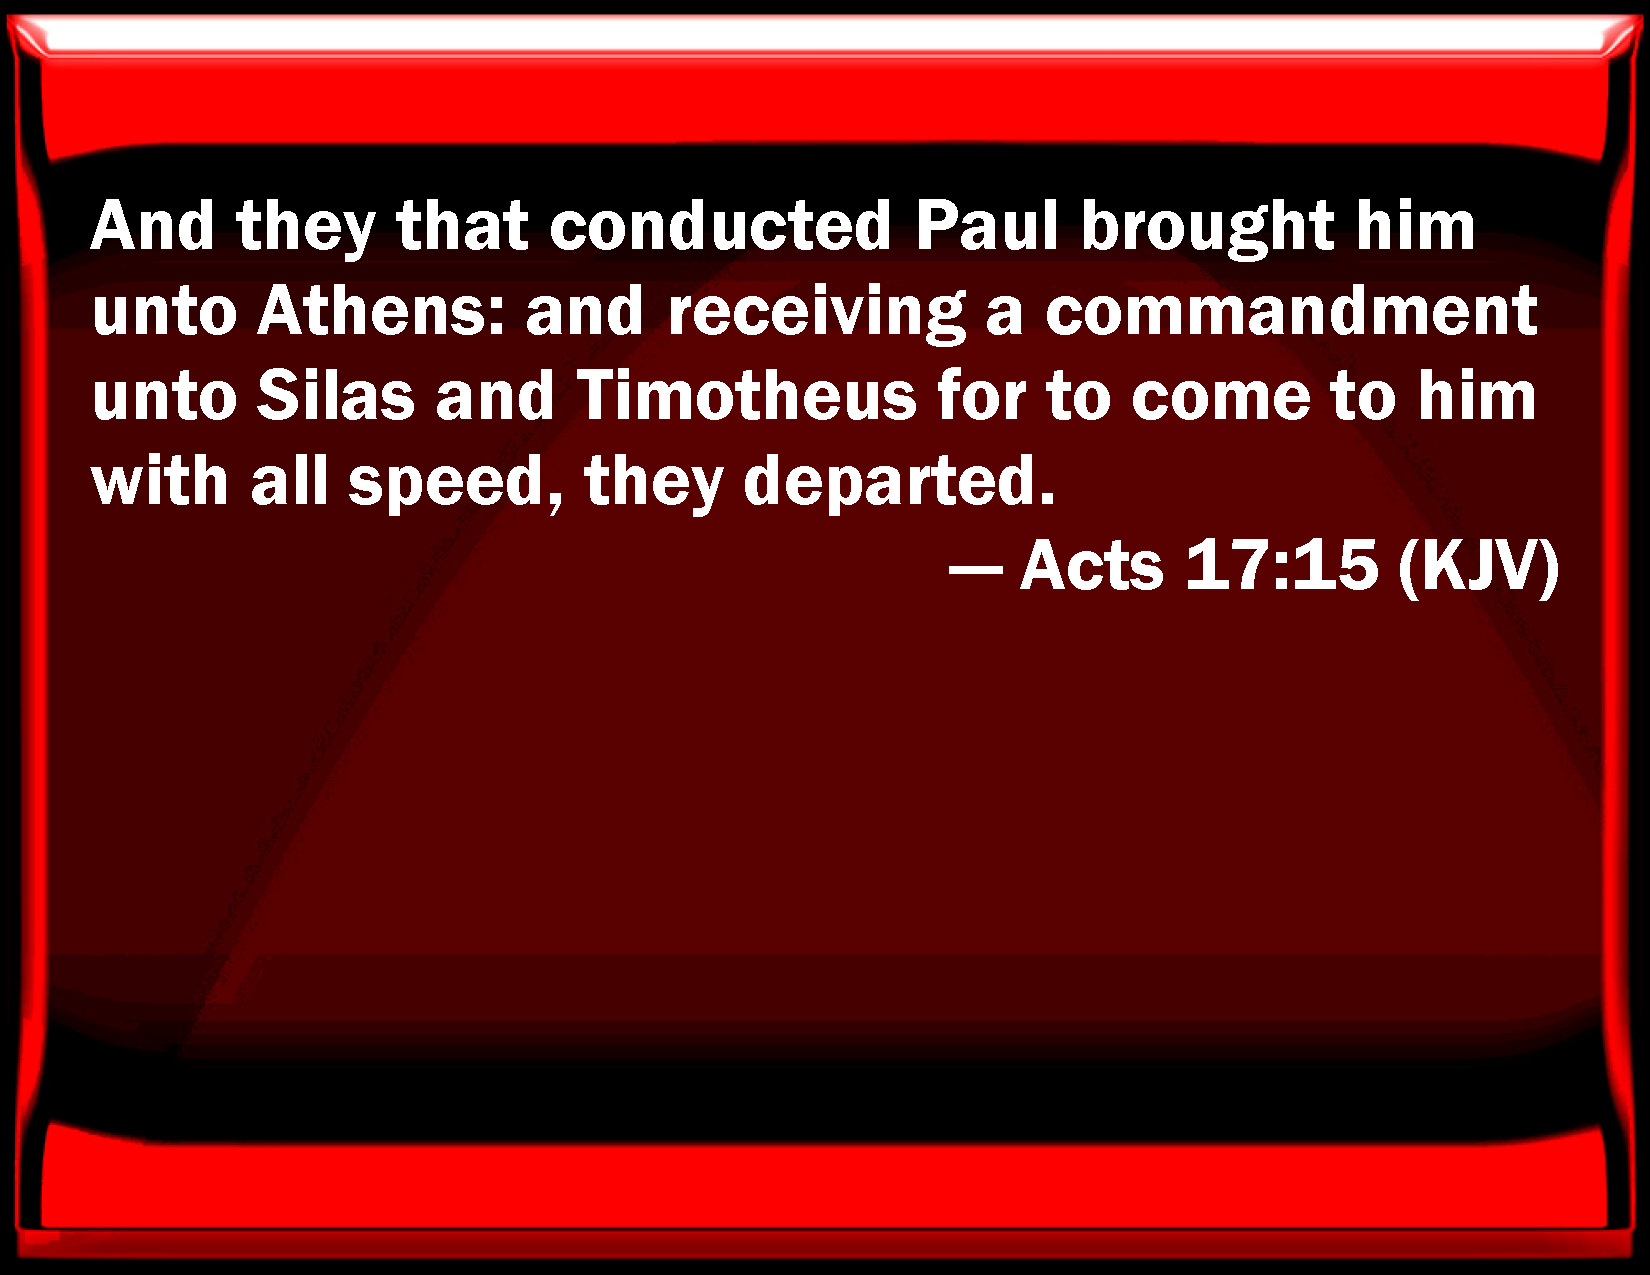 acts-17-15-and-they-that-conducted-paul-brought-him-to-athens-and